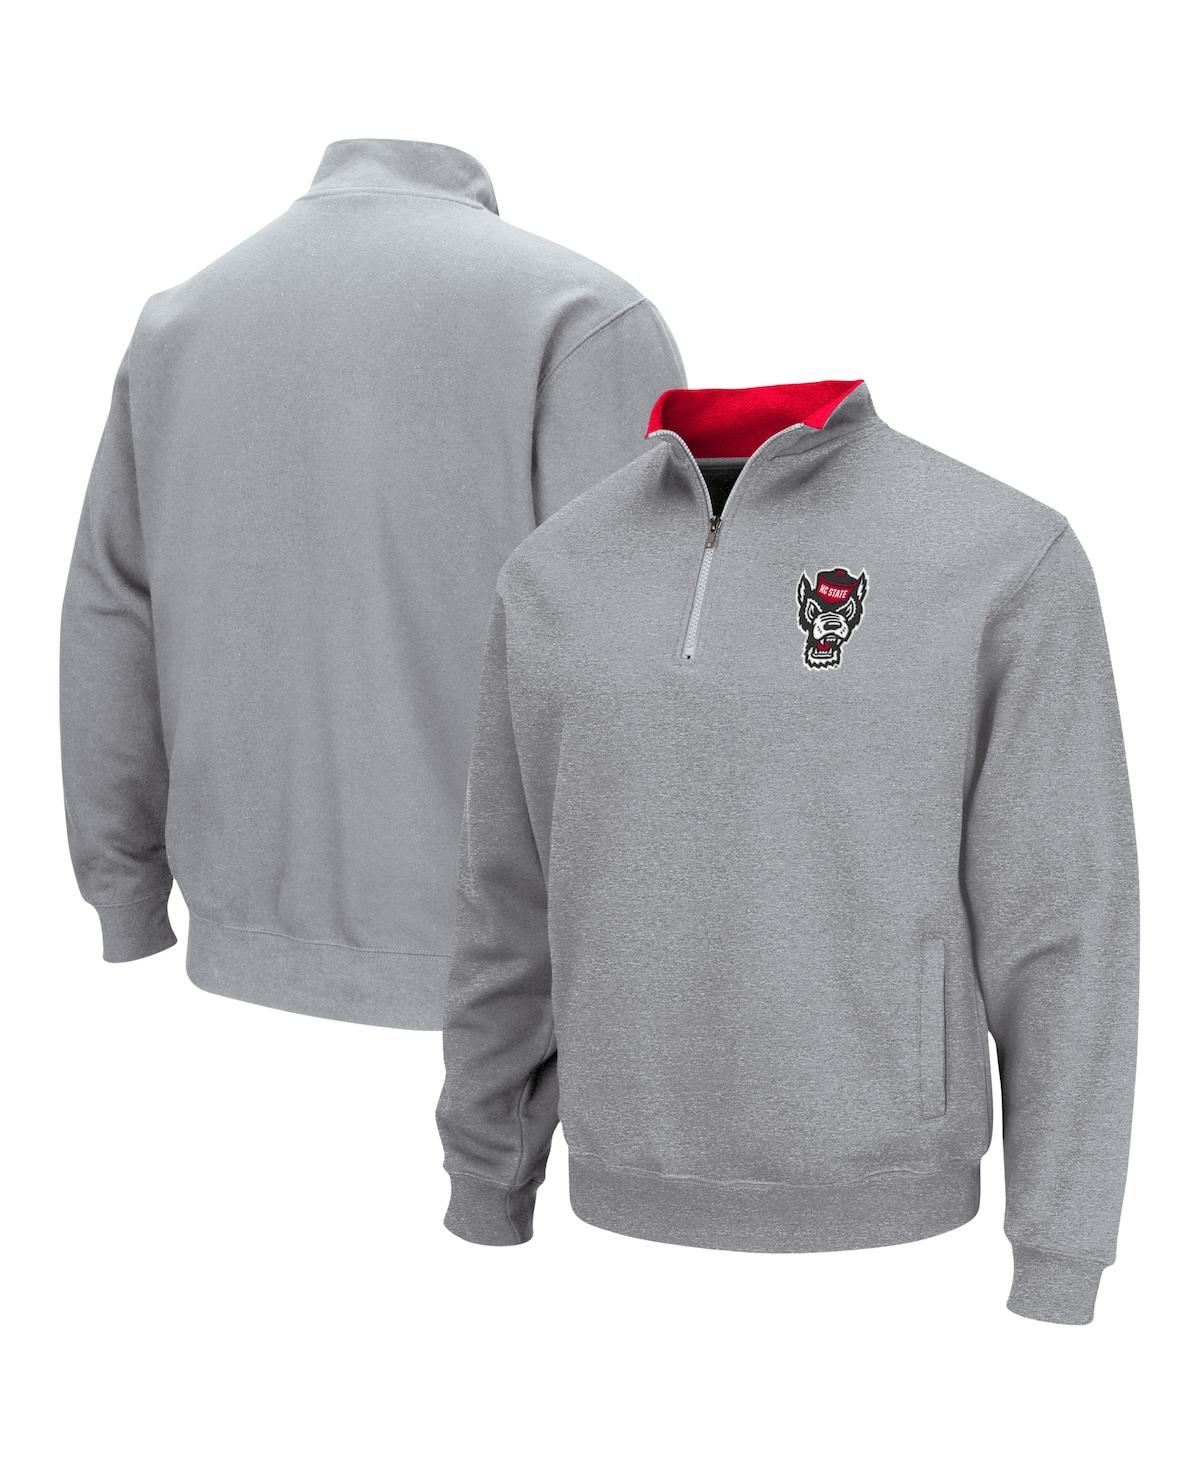 Men's Colosseum Heathered Gray Nc State Wolfpack Tortugas Team Logo Quarter-Zip Jacket - Heathered Gray